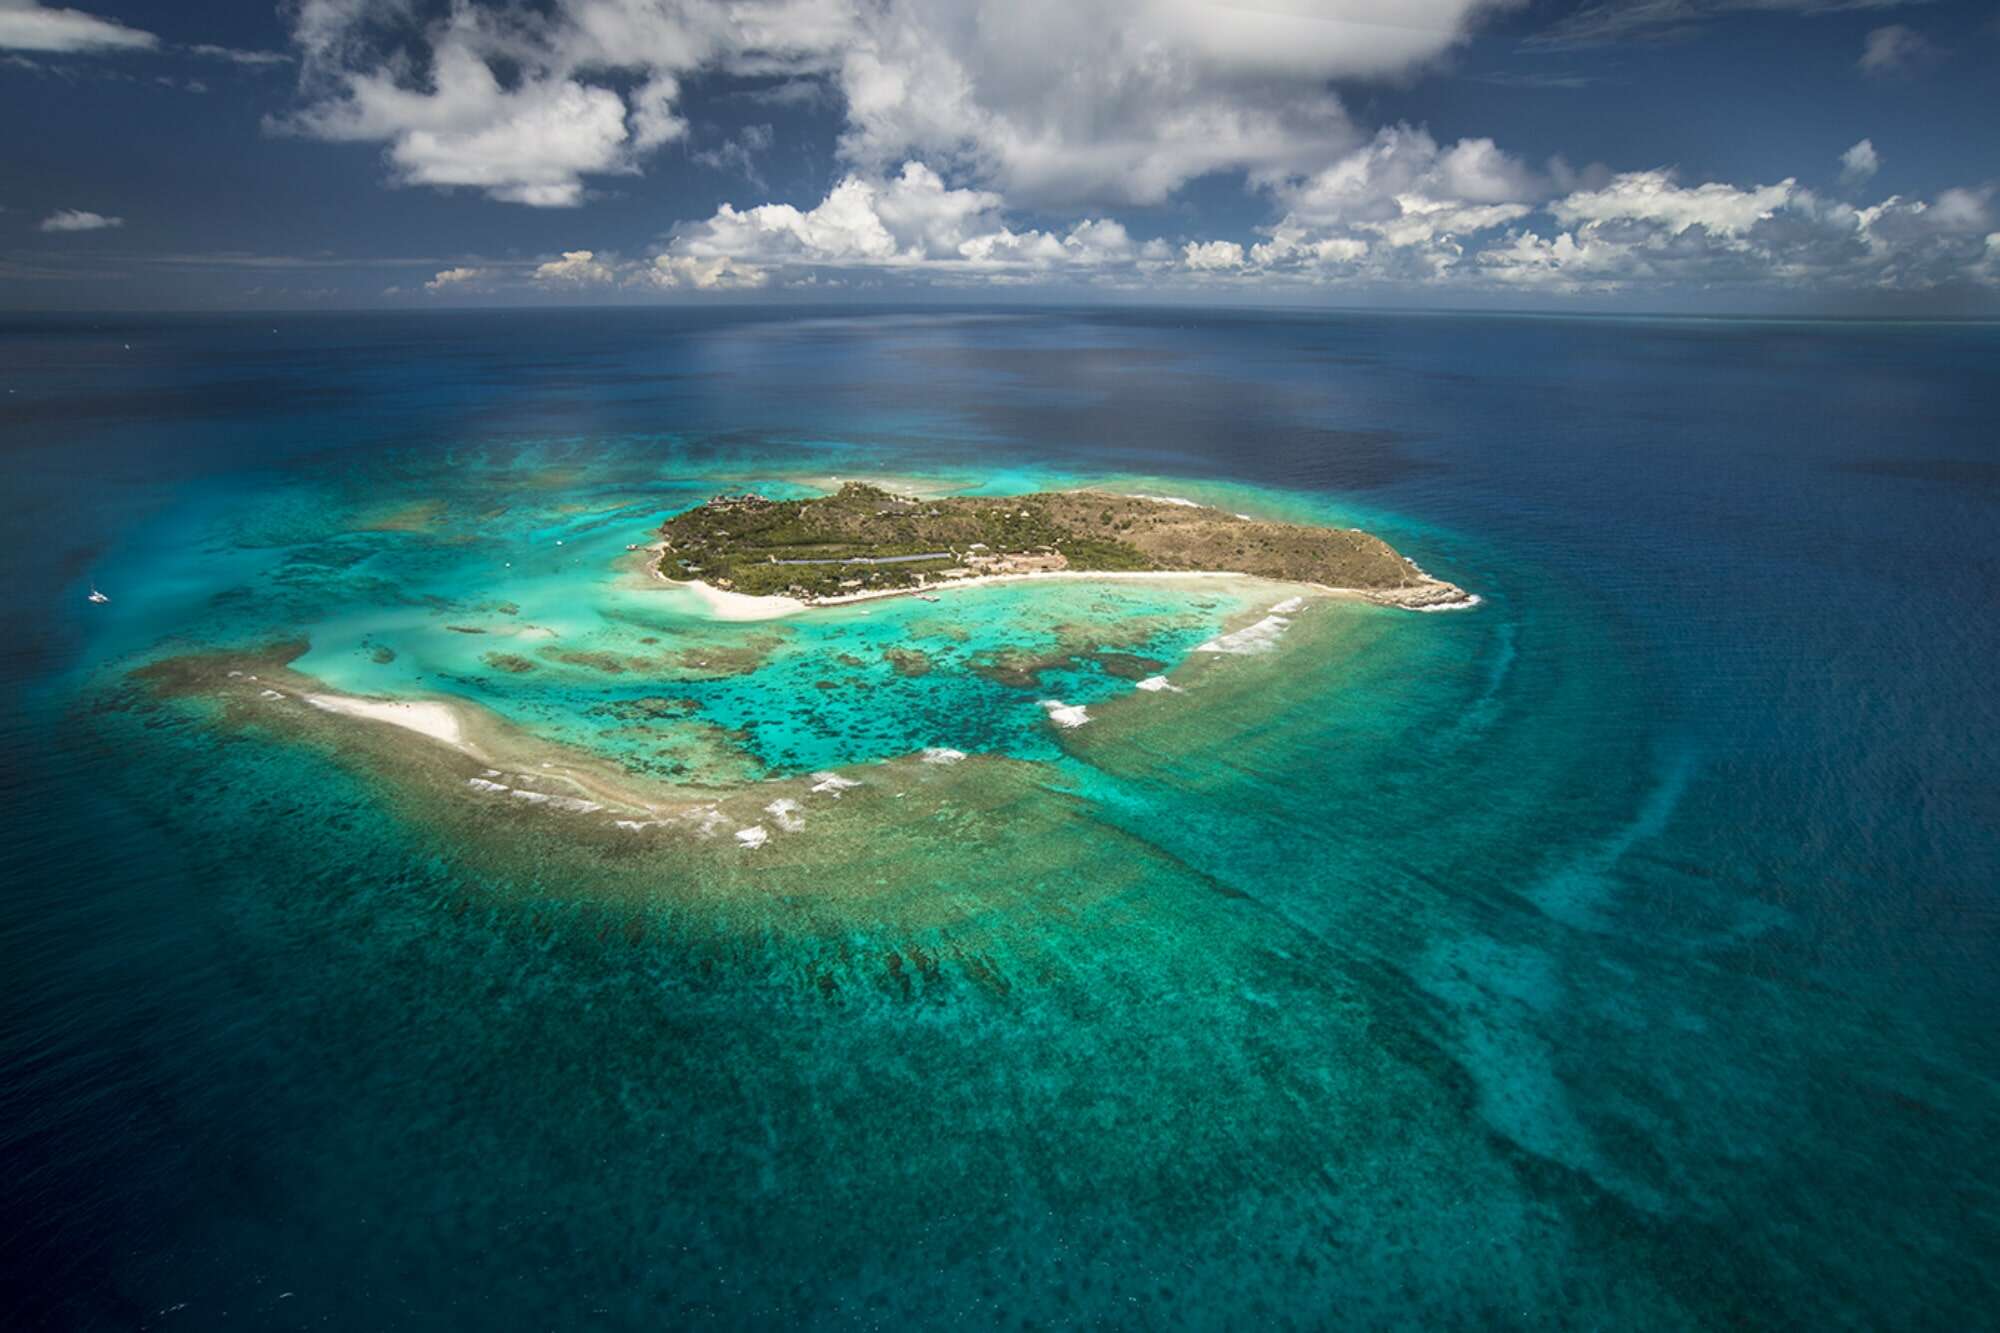 Owning and Living on Your Own Private Island